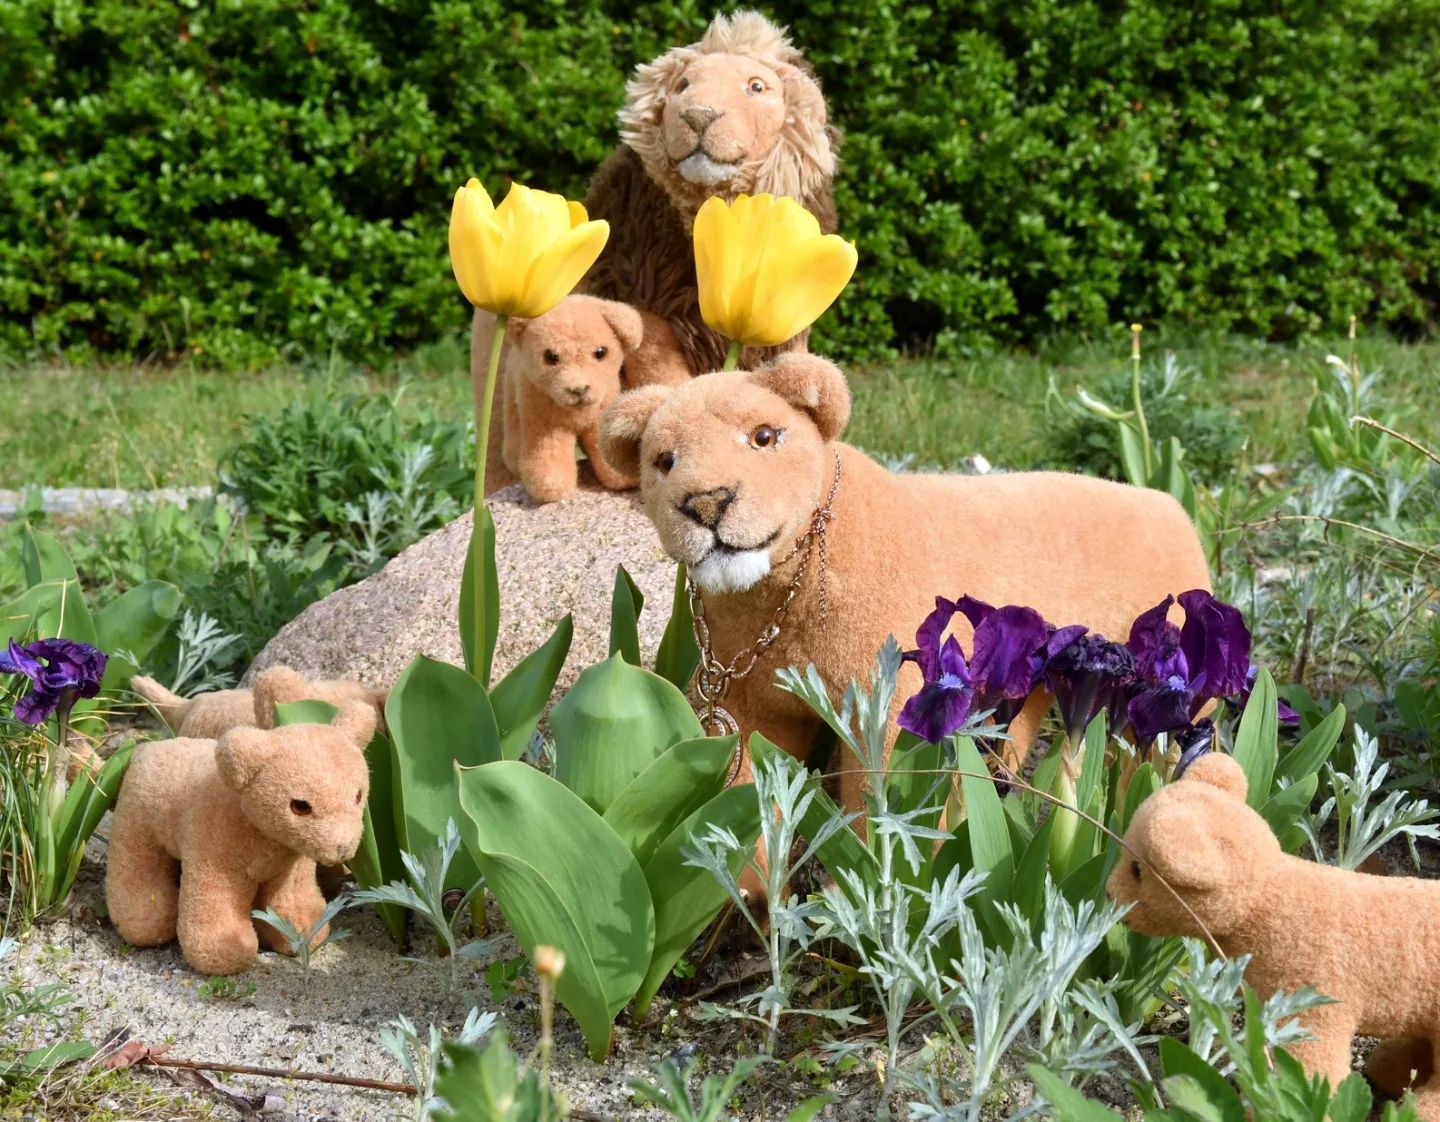 Amy, Queen of the Alba pride, wants more lionesses in her feed - her wish was our command. That&#039;s why we went out that day to take delicious photos. #Flowers  #Spring  #PrideRock  #JubaOnTour  #PlushiesOfInstagram  #PlushiesOfGermany  #Plushie  #Kuscheltier  #plushies  #plushiecommunity  #theinstaplushies  #instaplushies  #stuffies  #stuffiesofinstagram  #plushielife  #plushieadventures  #Koesen  #KoesenerSpielzeug